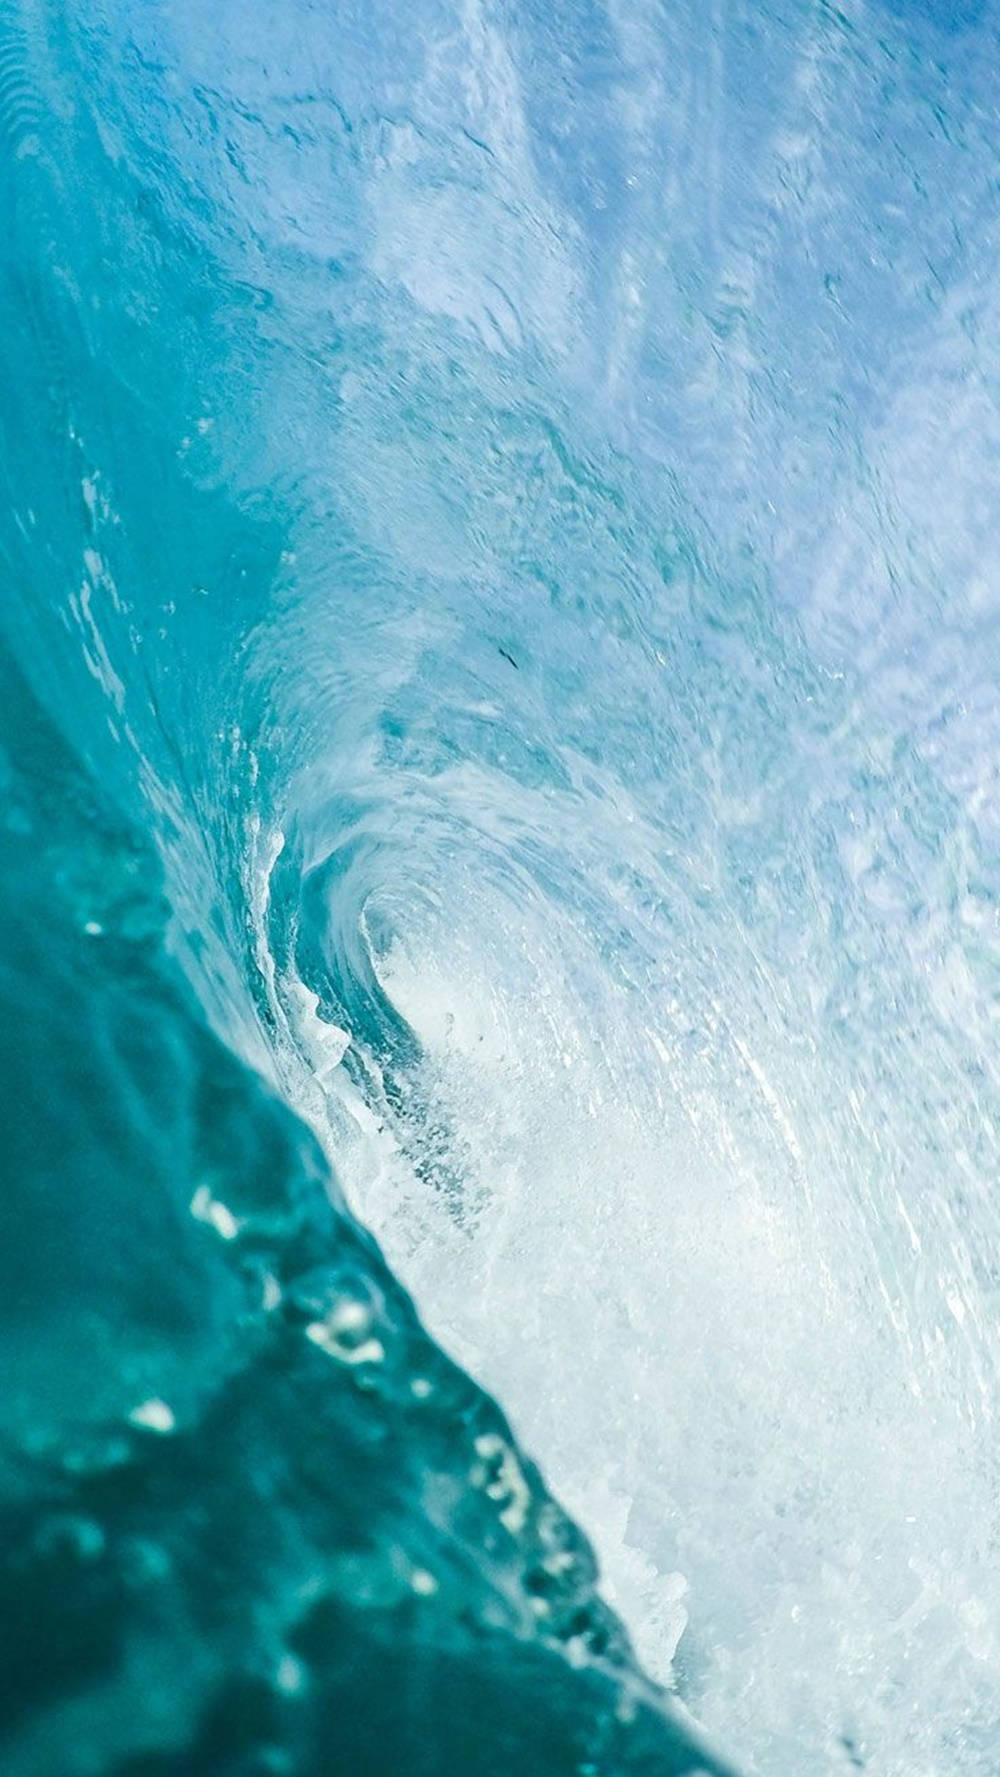 Soak In The Beauty Of The Ocean With The Latest Iphone